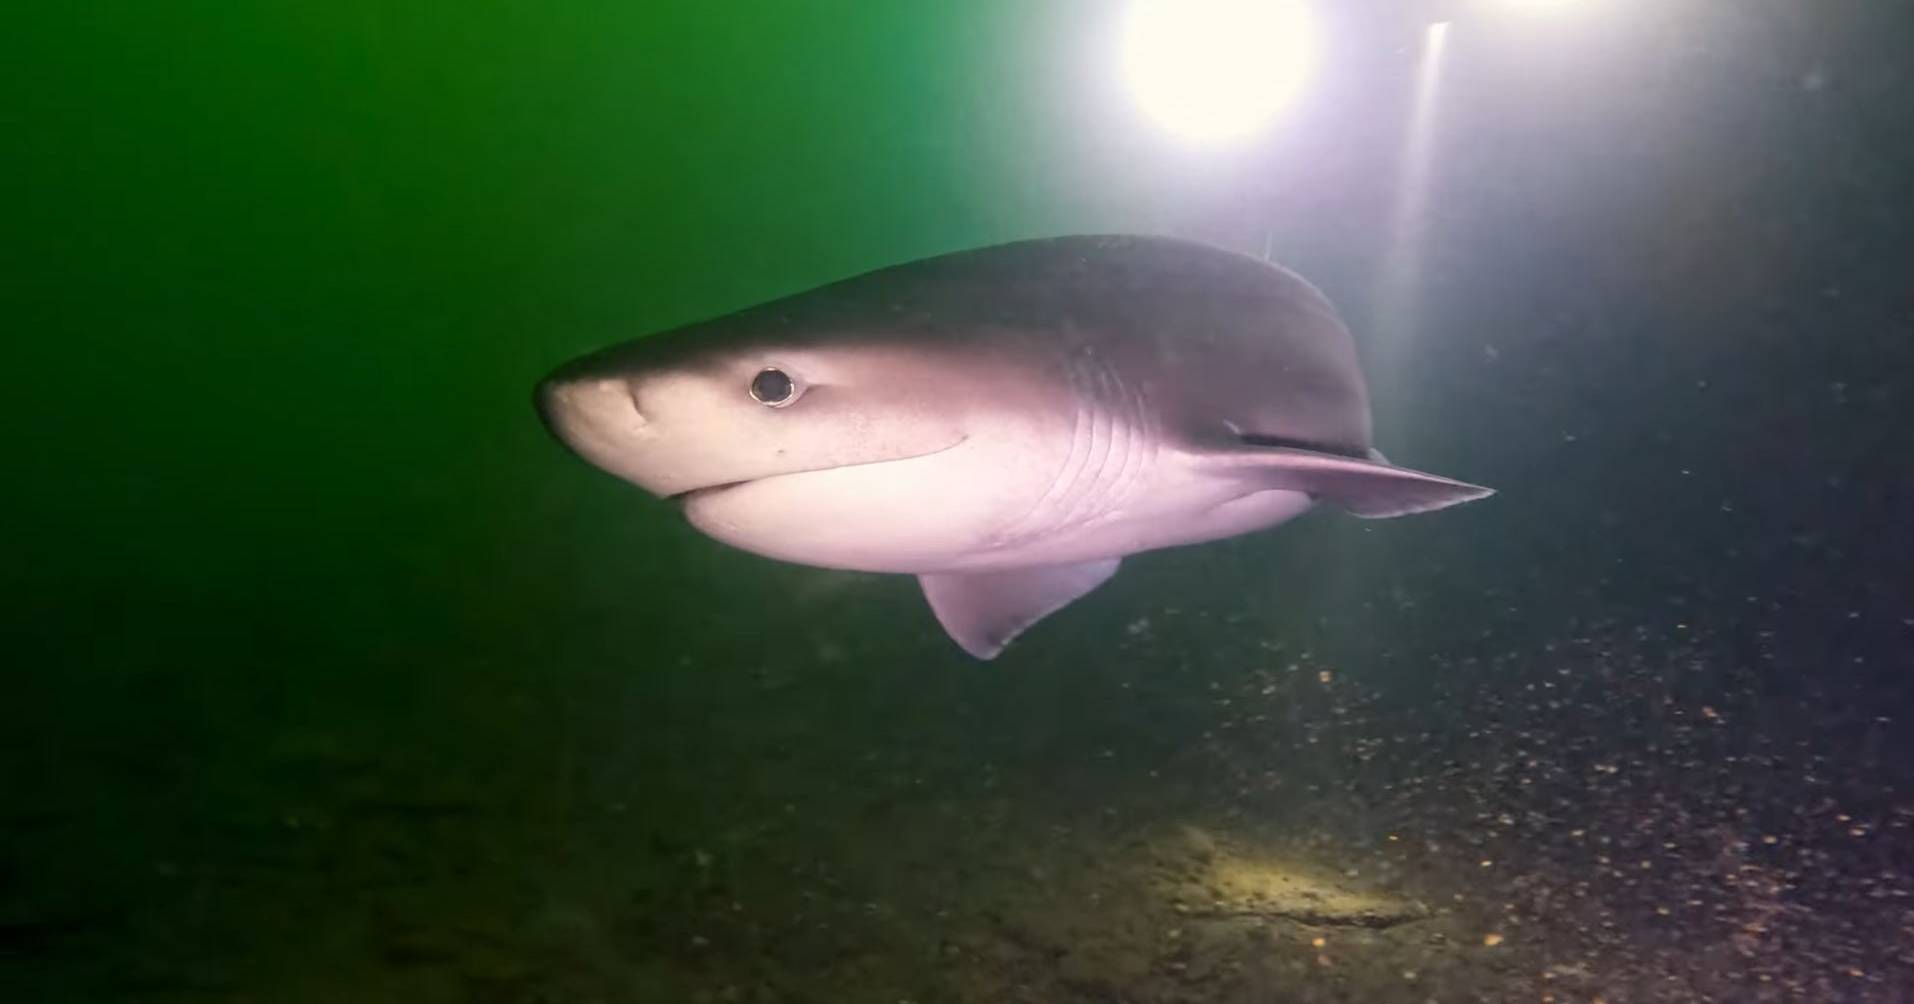 Divers surprised by a rare shark: “It was so beautiful to see”